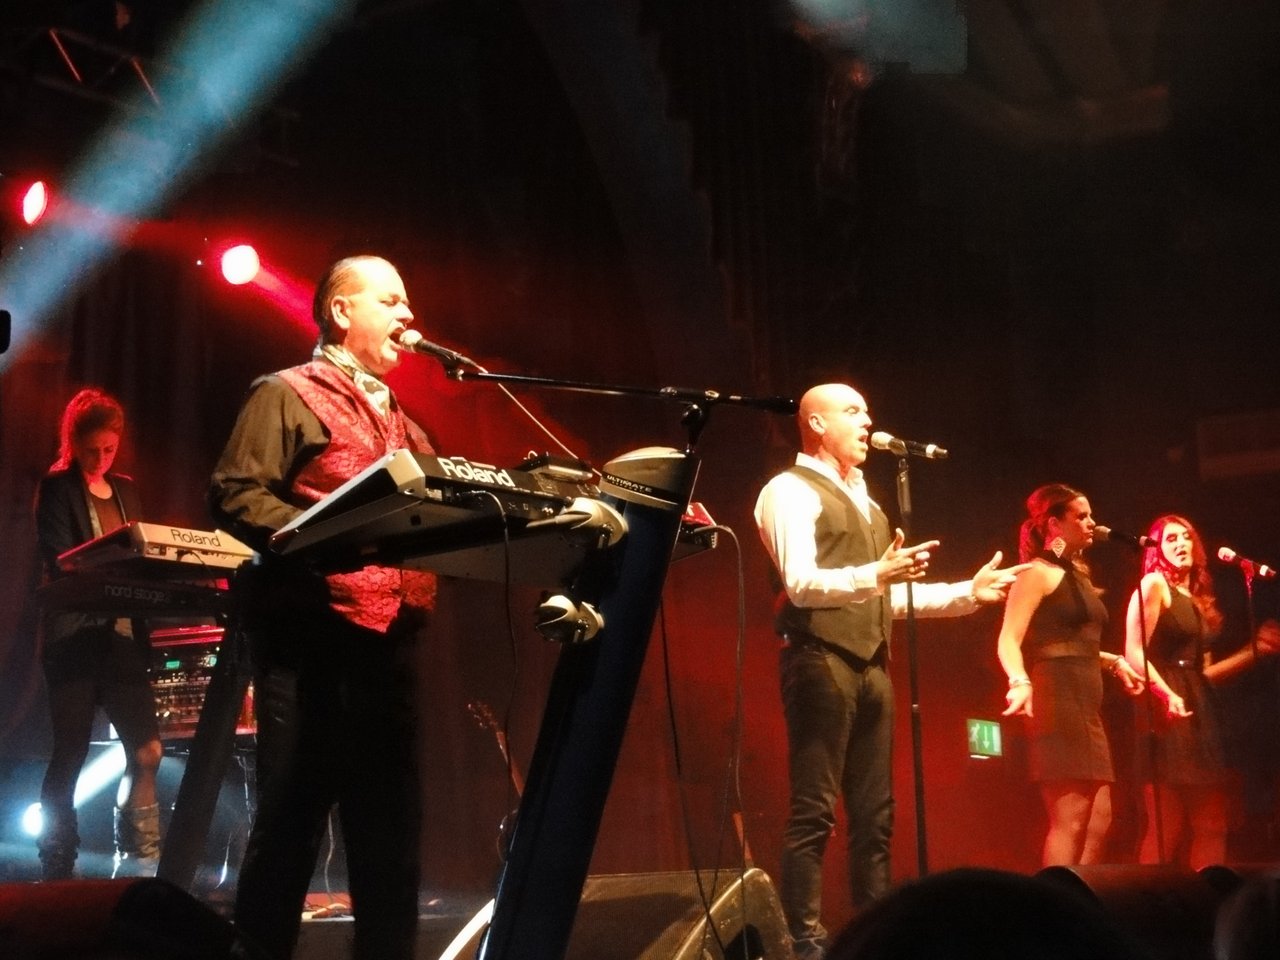 30 Heaven 17 live at the Assembly 2014.jpg